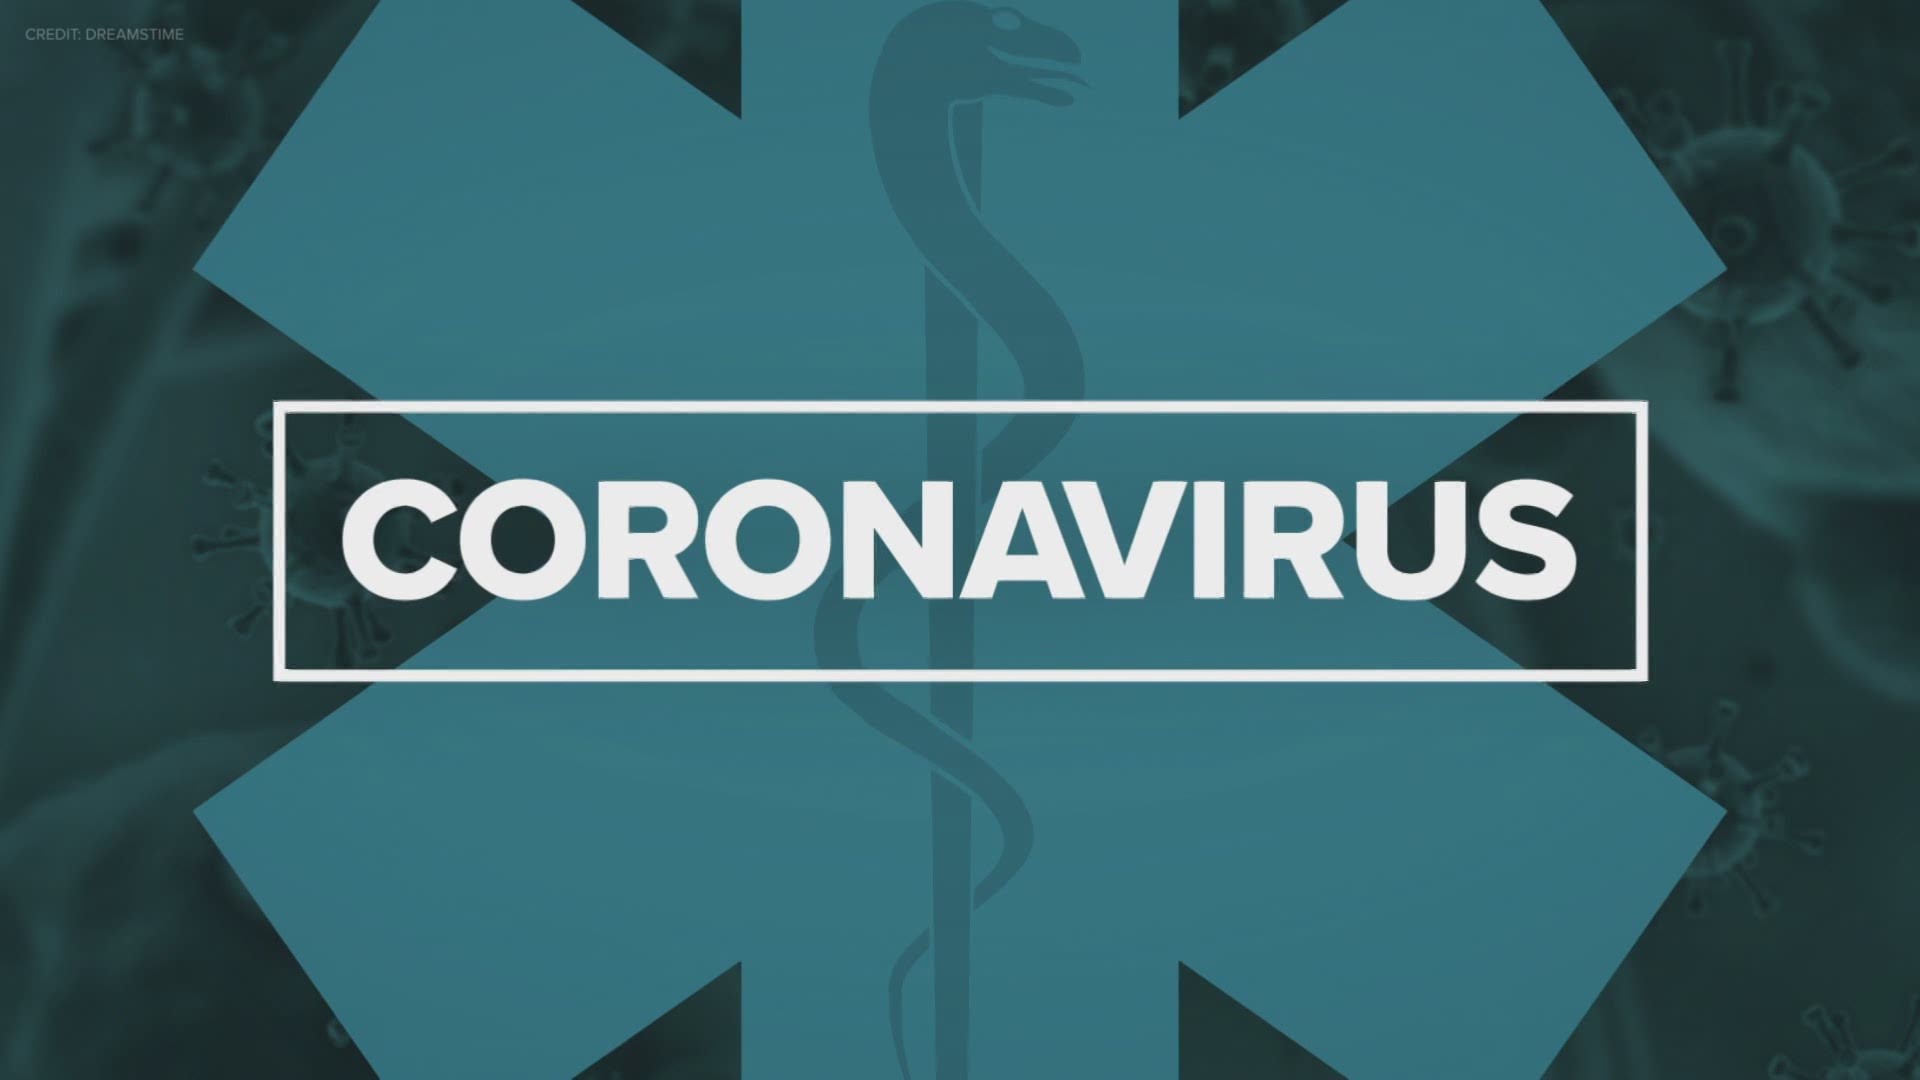 Indiana coronavirus updates: Marion County sports update, IPS proposes e-Learning to start school year, Gov. Holcomb update, Indiana numbers — 7/30/2020 Sunrise